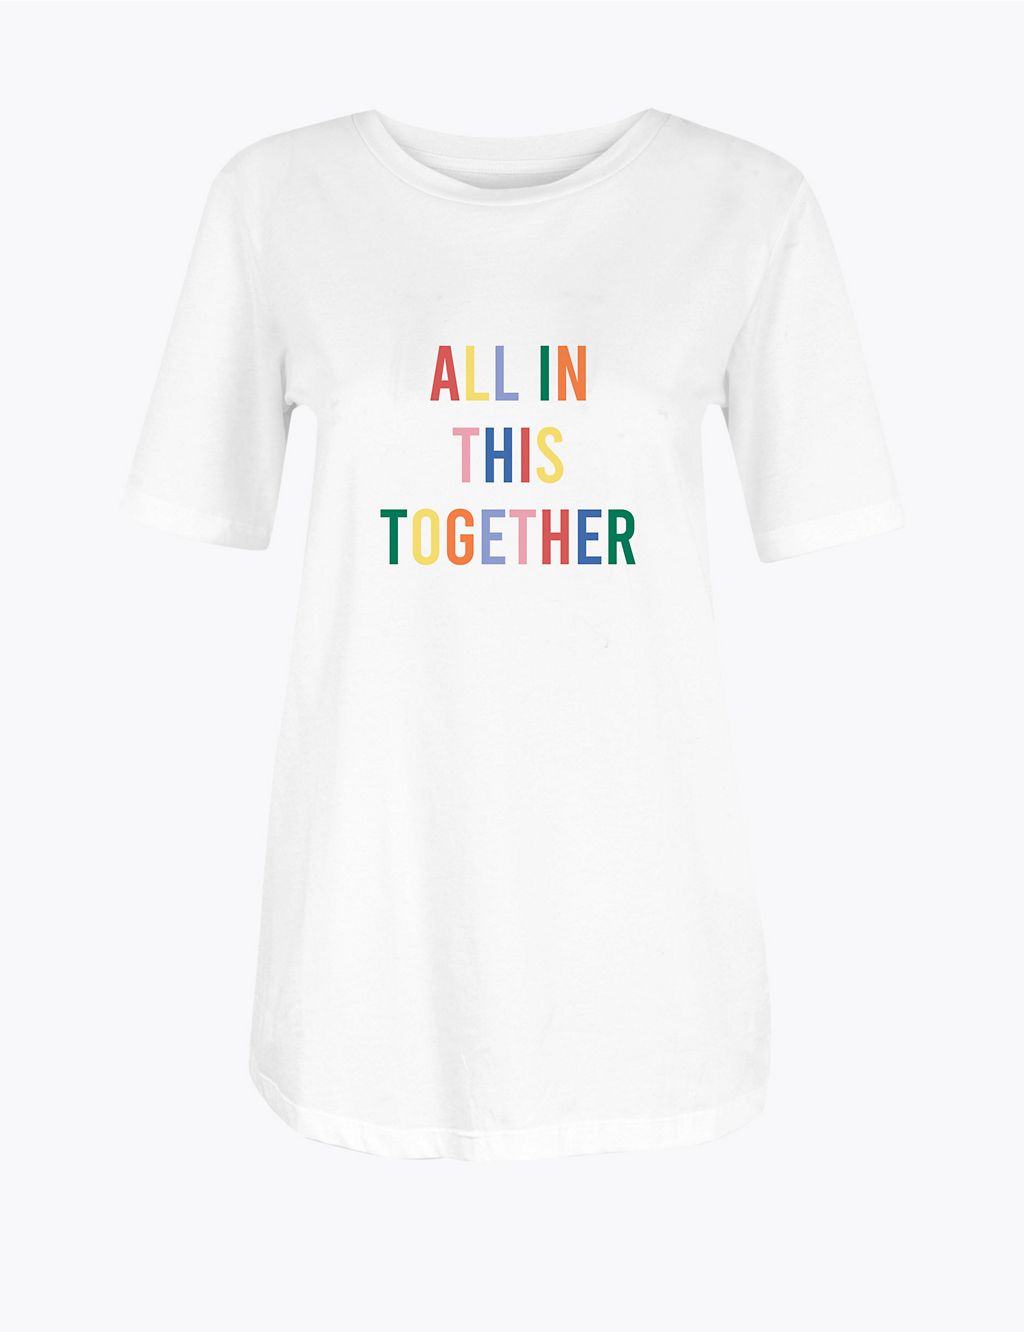 Women's NHS Charities Together Slogan T-Shirt 1 of 1